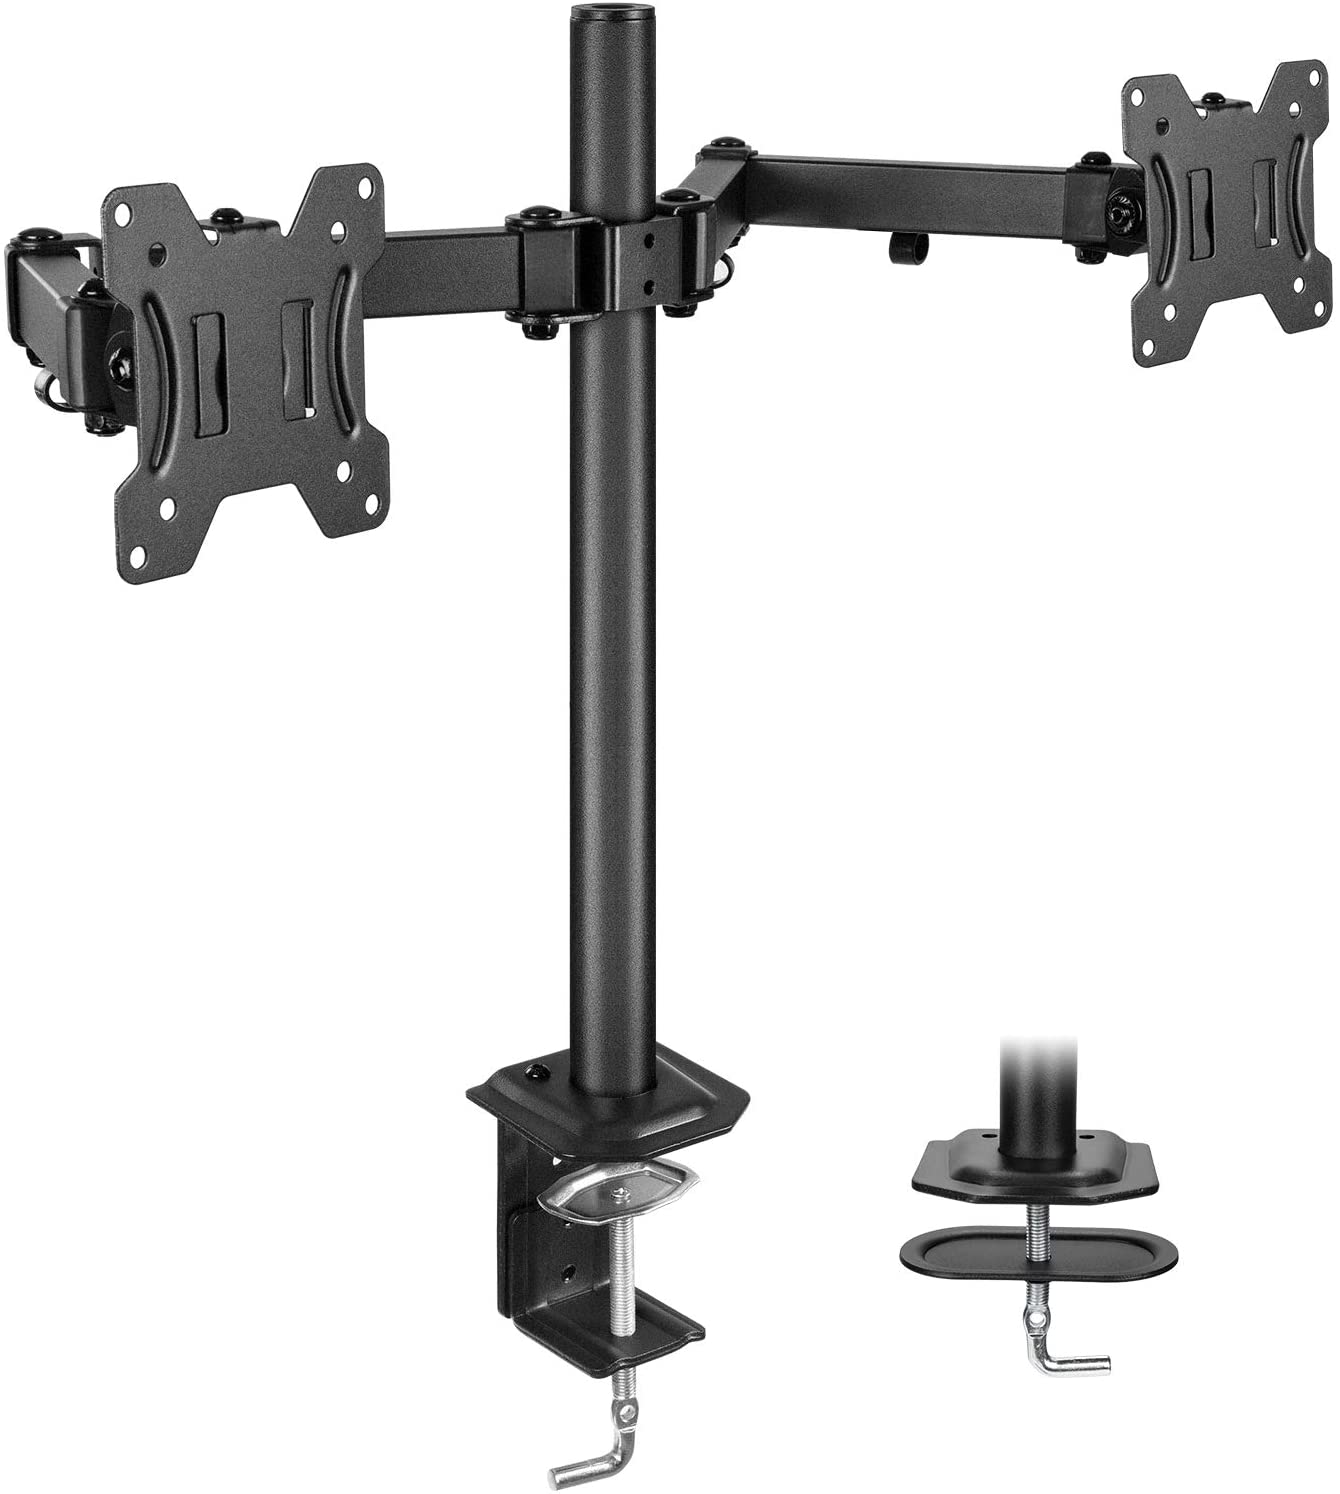 HUANUO Dual Monitor Stand Mount. - e4cents